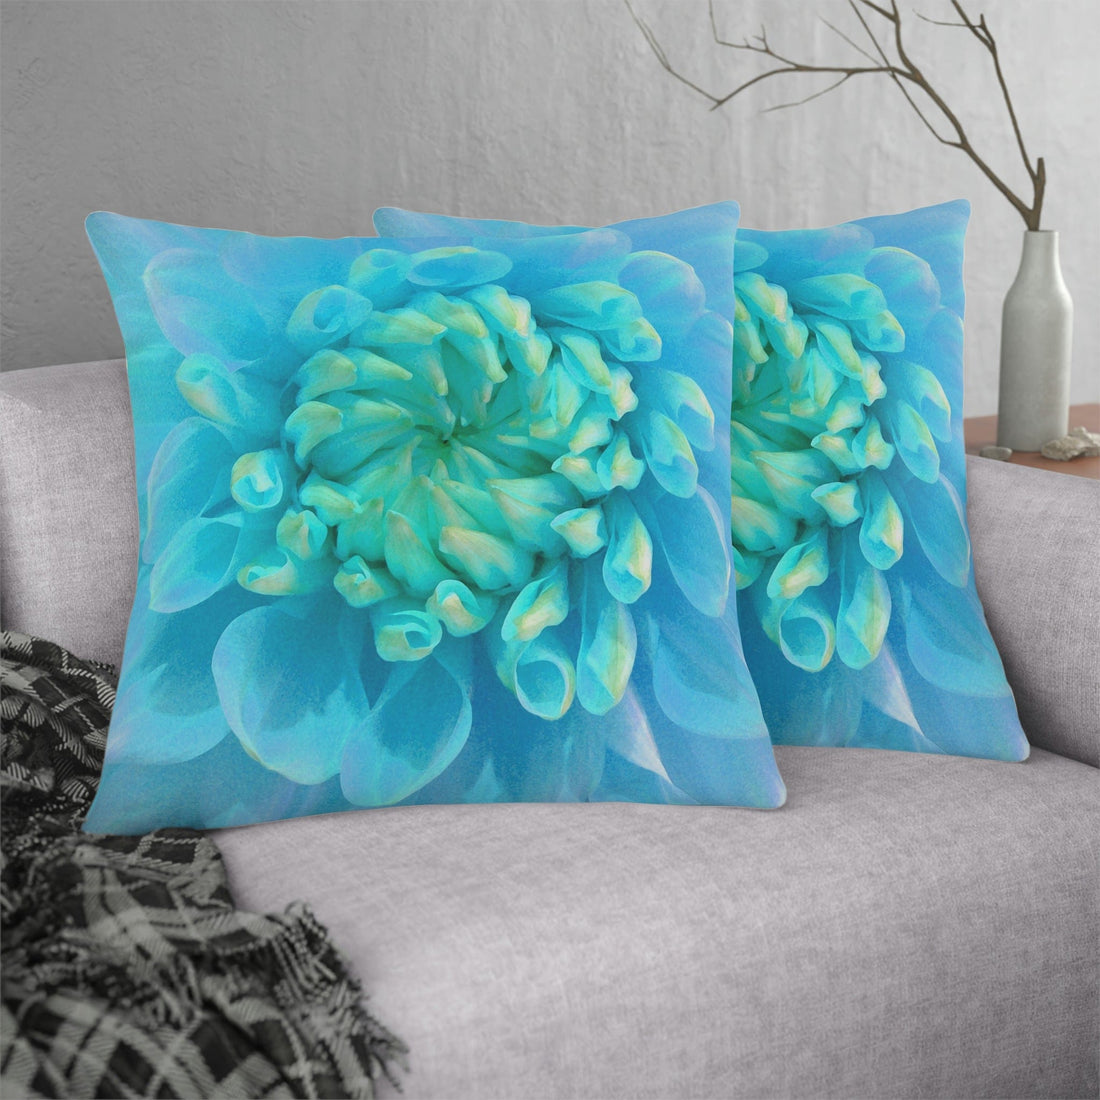 Kate McEnroe New York Outdoor Pillow in Painted Turquoise Dahlia Flower Outdoor Pillows 26&quot; × 26&quot; / Square 16407444430898672731